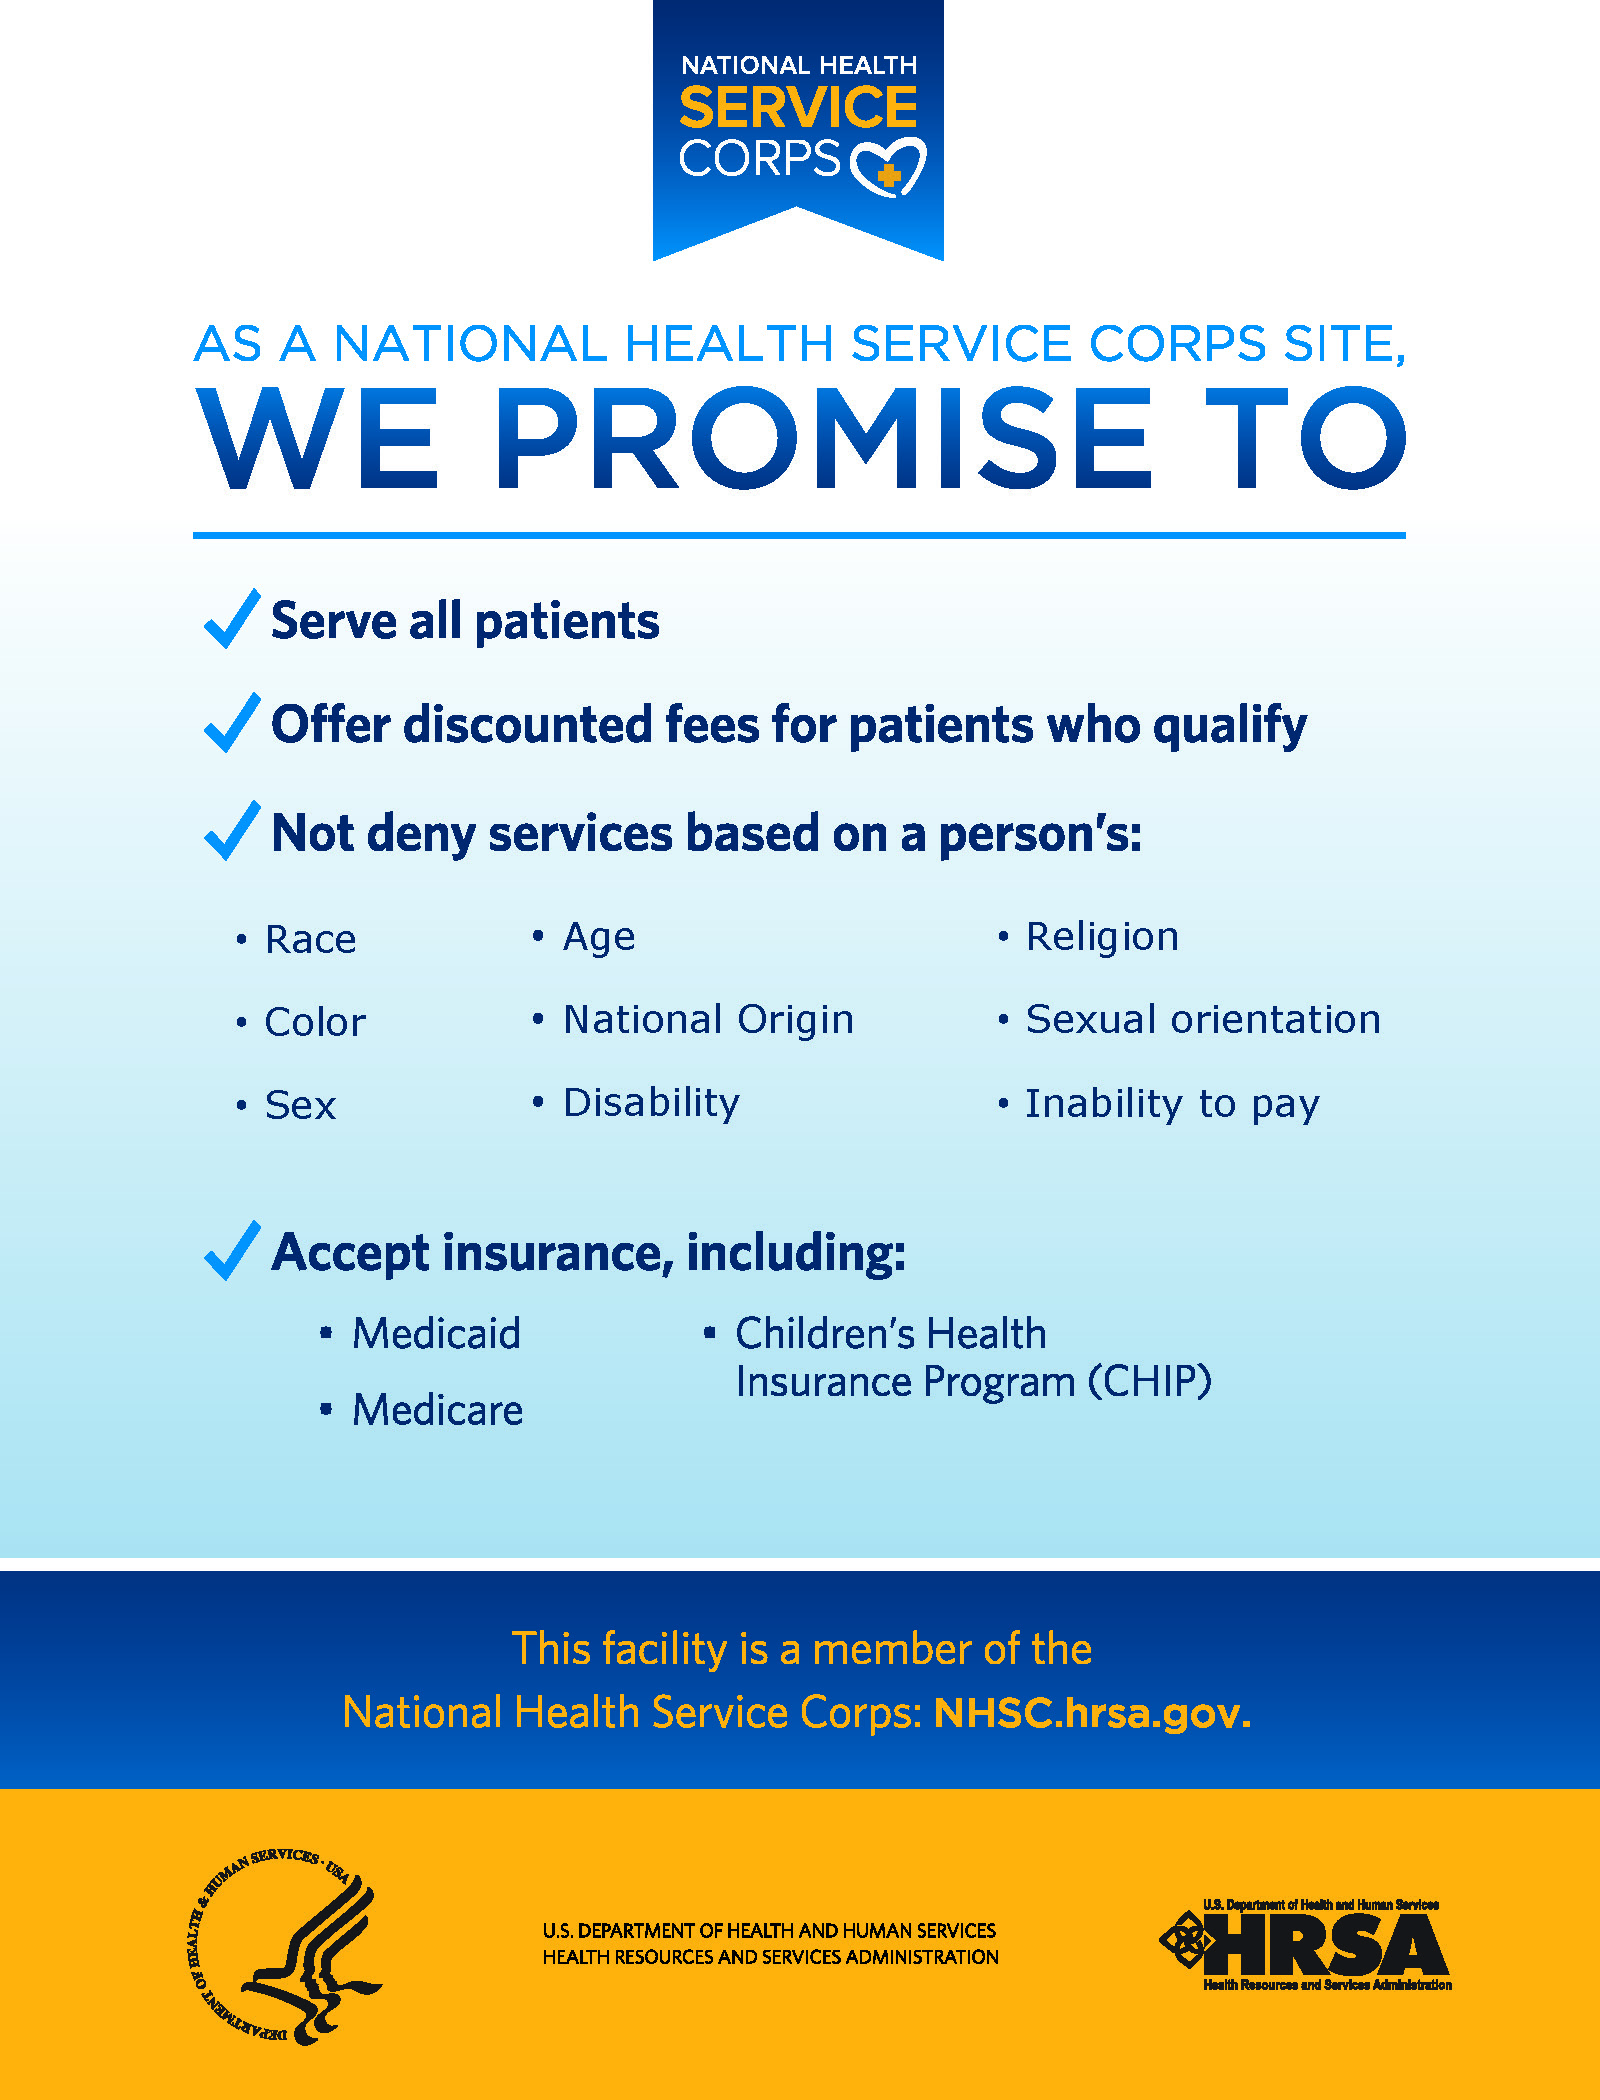 NHSC: As a National Health Service Corp